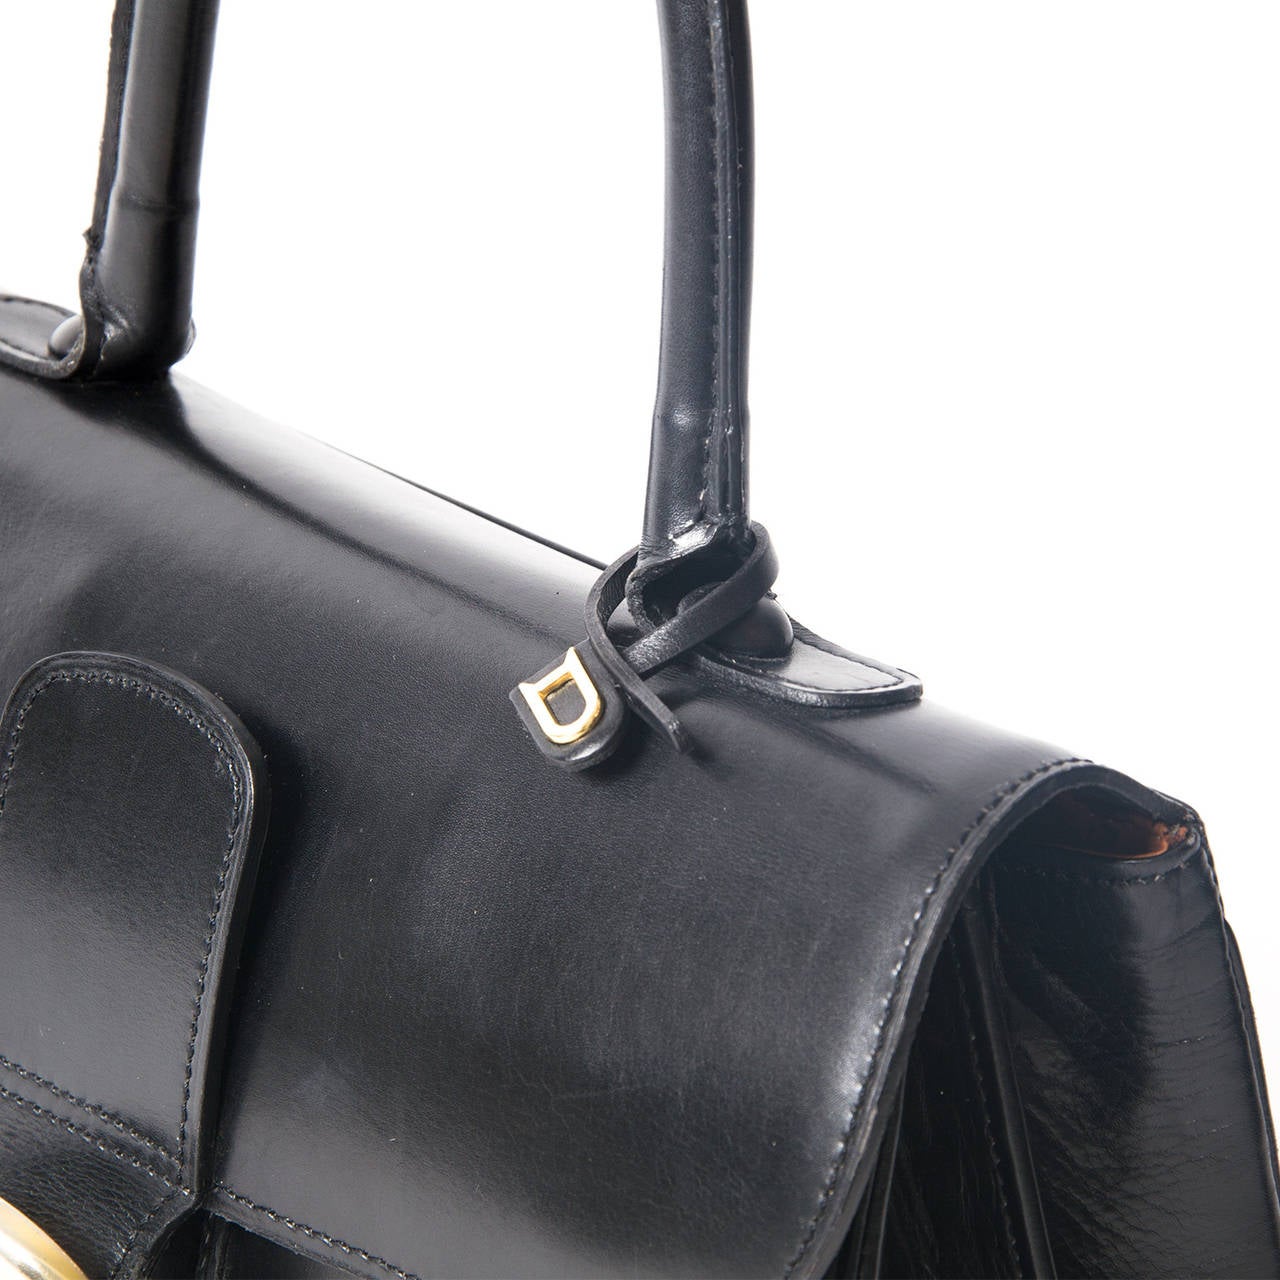 Delvaux black Brillant in soft calfskin with golden hardware.  
This classic Brillant from premium Belgium luxury leather goods brand Delvaux excels in both style and quality. Featured in classic black, this piece is a versatile option for any